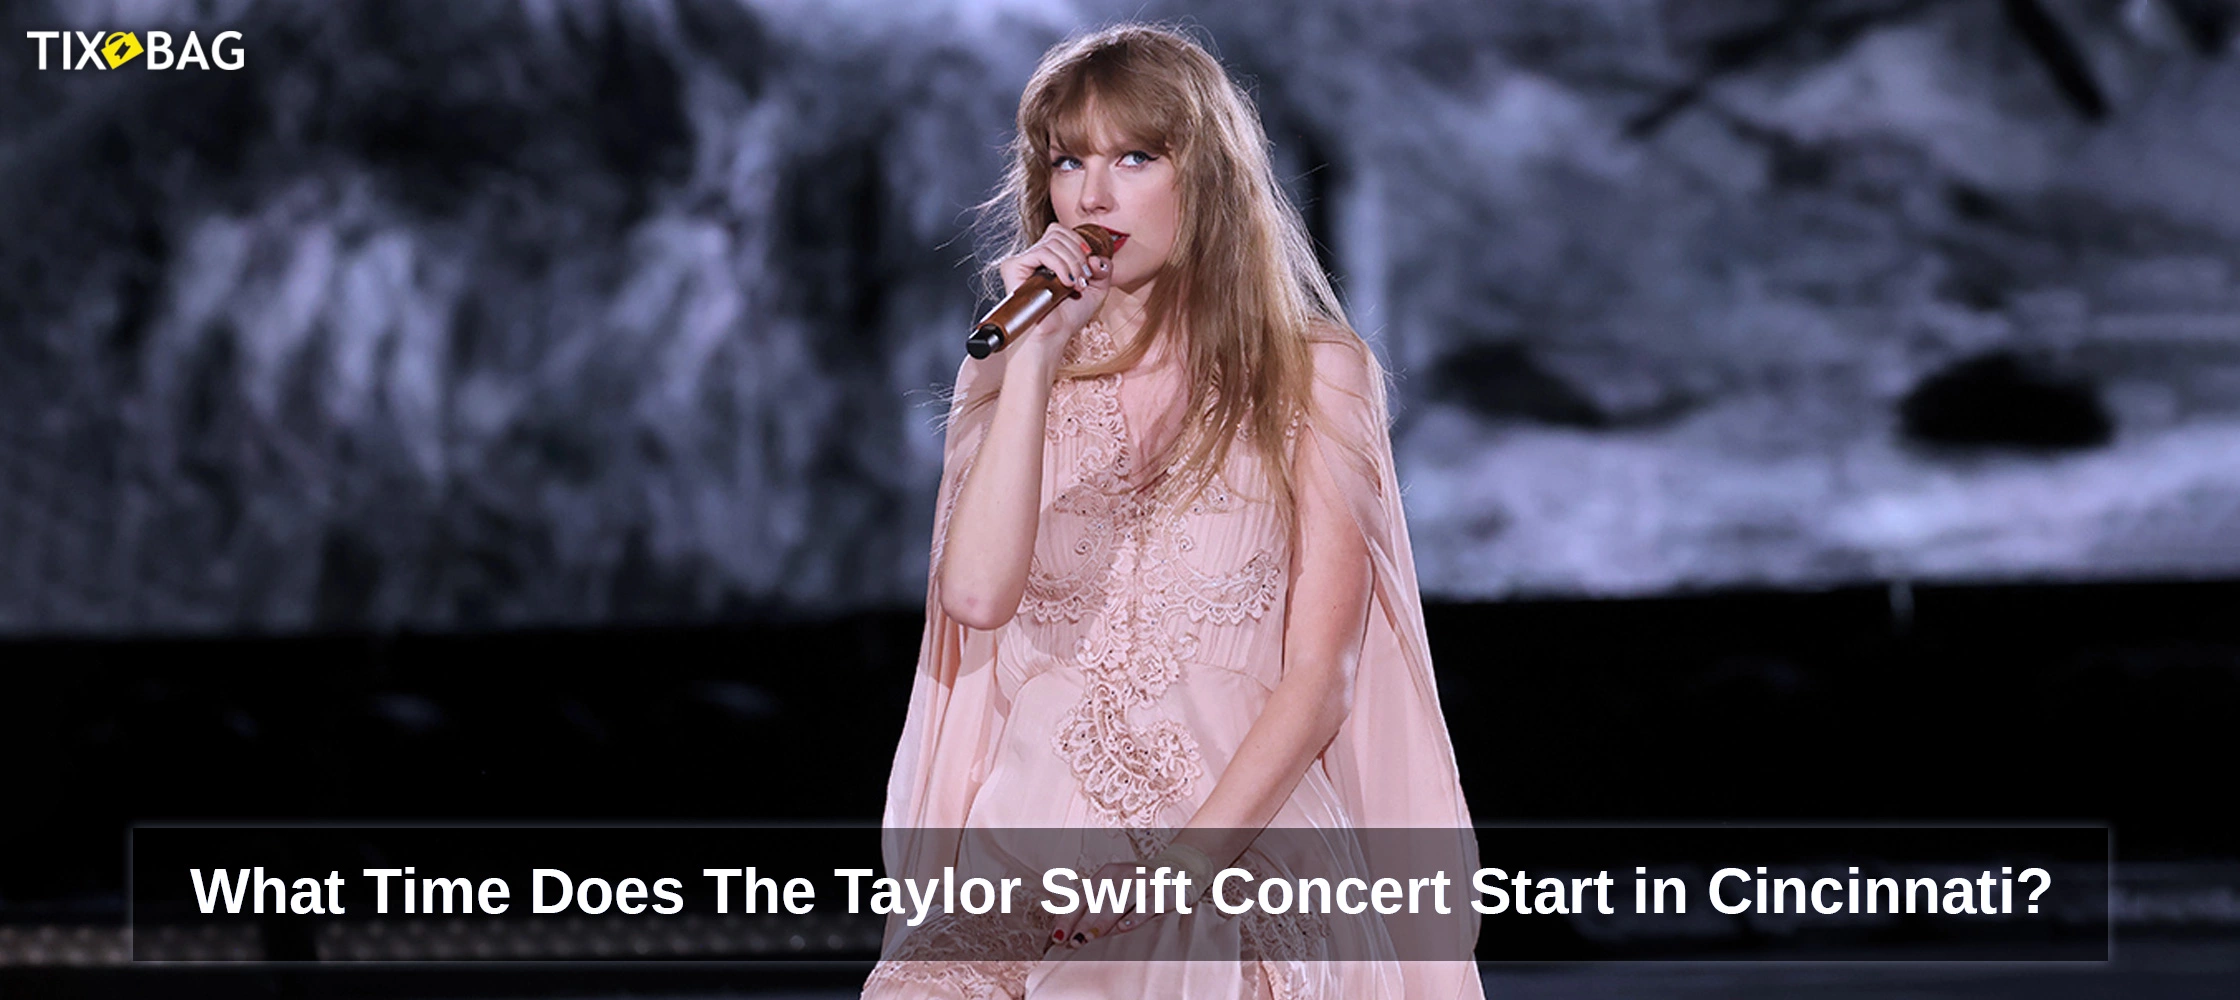 What Time Does The Taylor Swift Concert Start in Cincinnati?